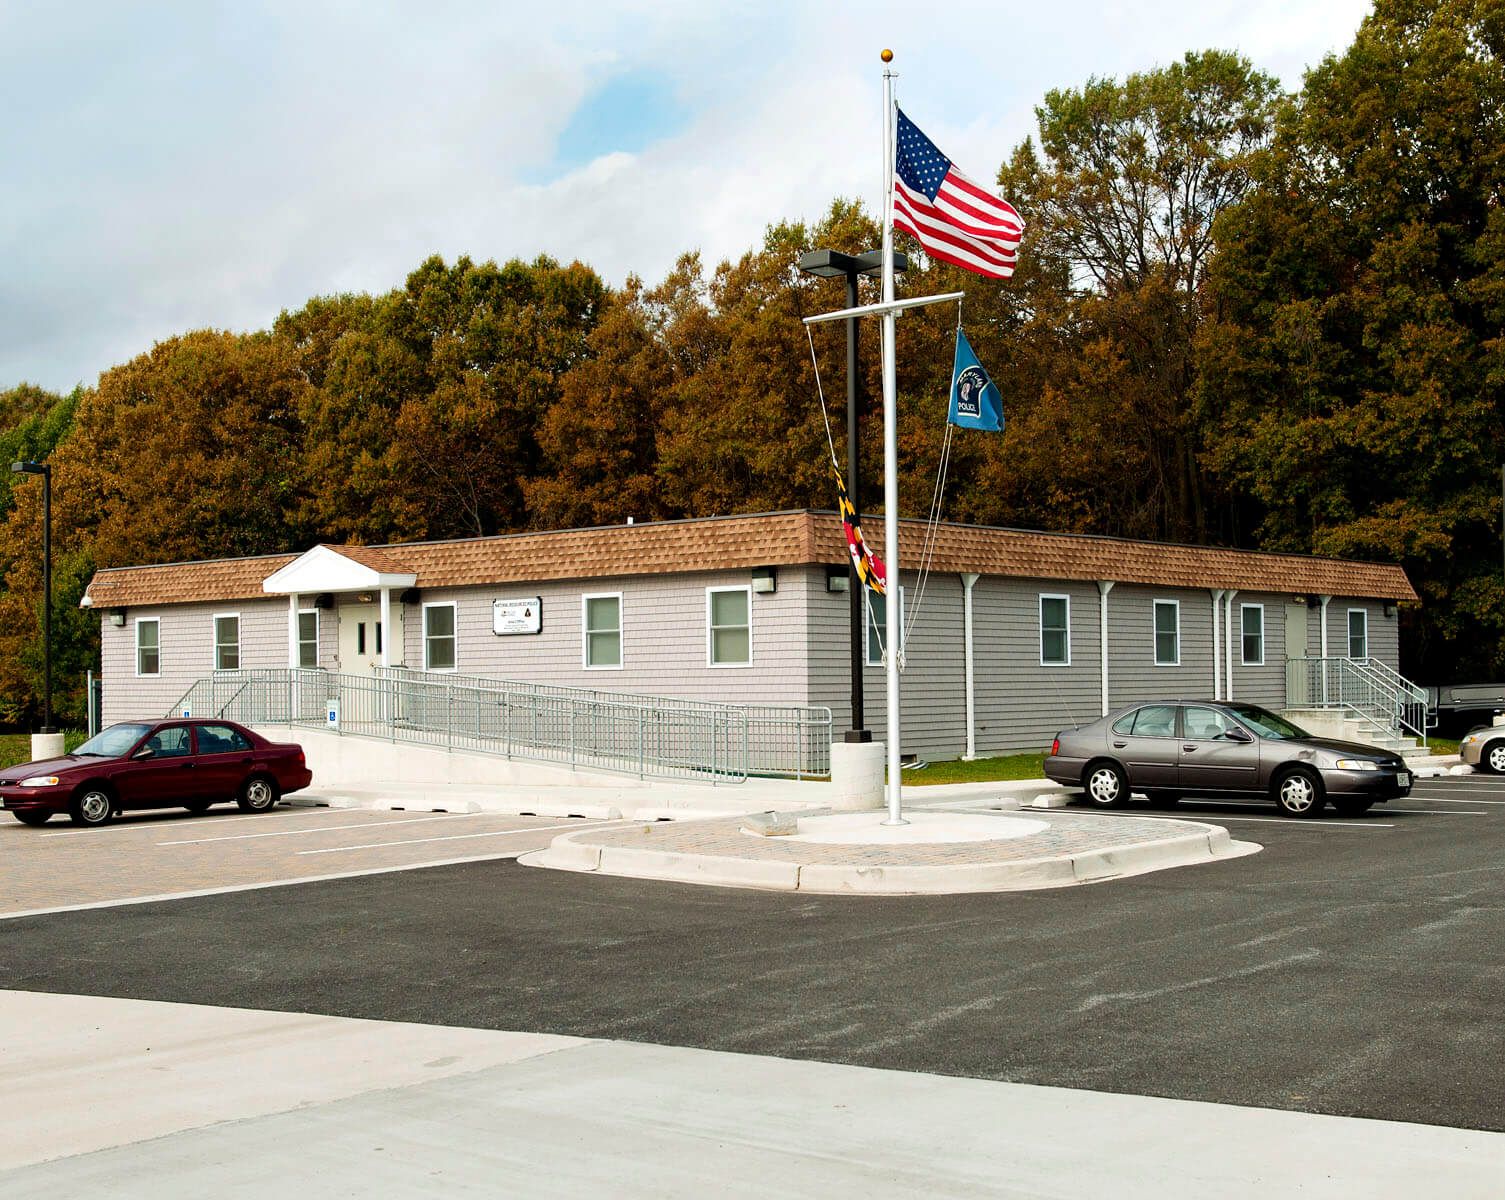 MD-State-Police-Modular-Communications-Building-Exterior-5